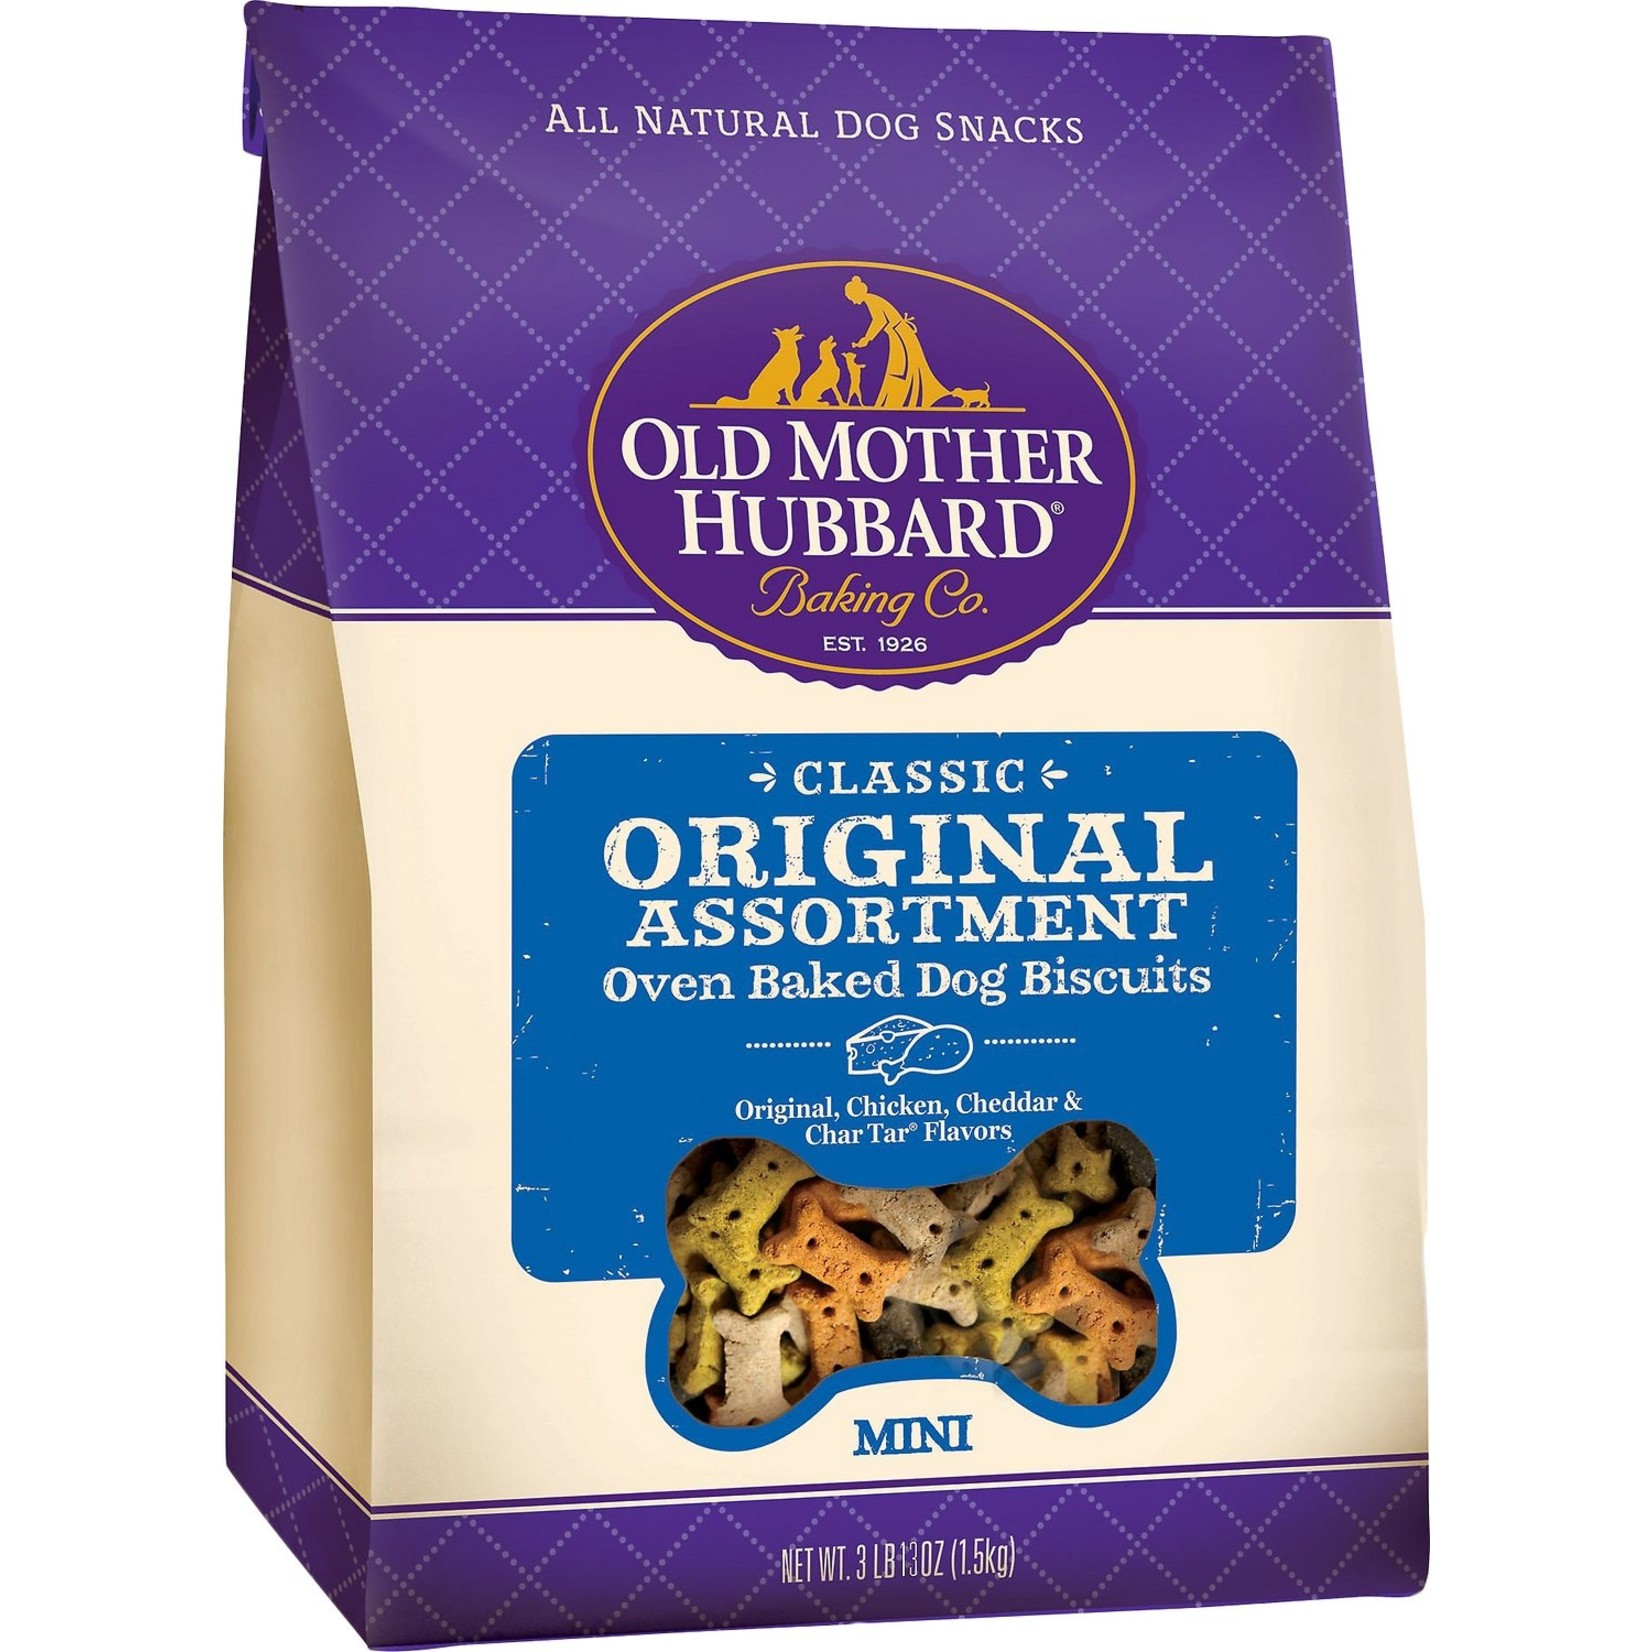 Old Mother Hubbard Old Mother Hubbard Classic Original Assortment Oven Baked Dog Biscuits Mini 3lbs - Original, Chicken, Cheddar, Char-Tar